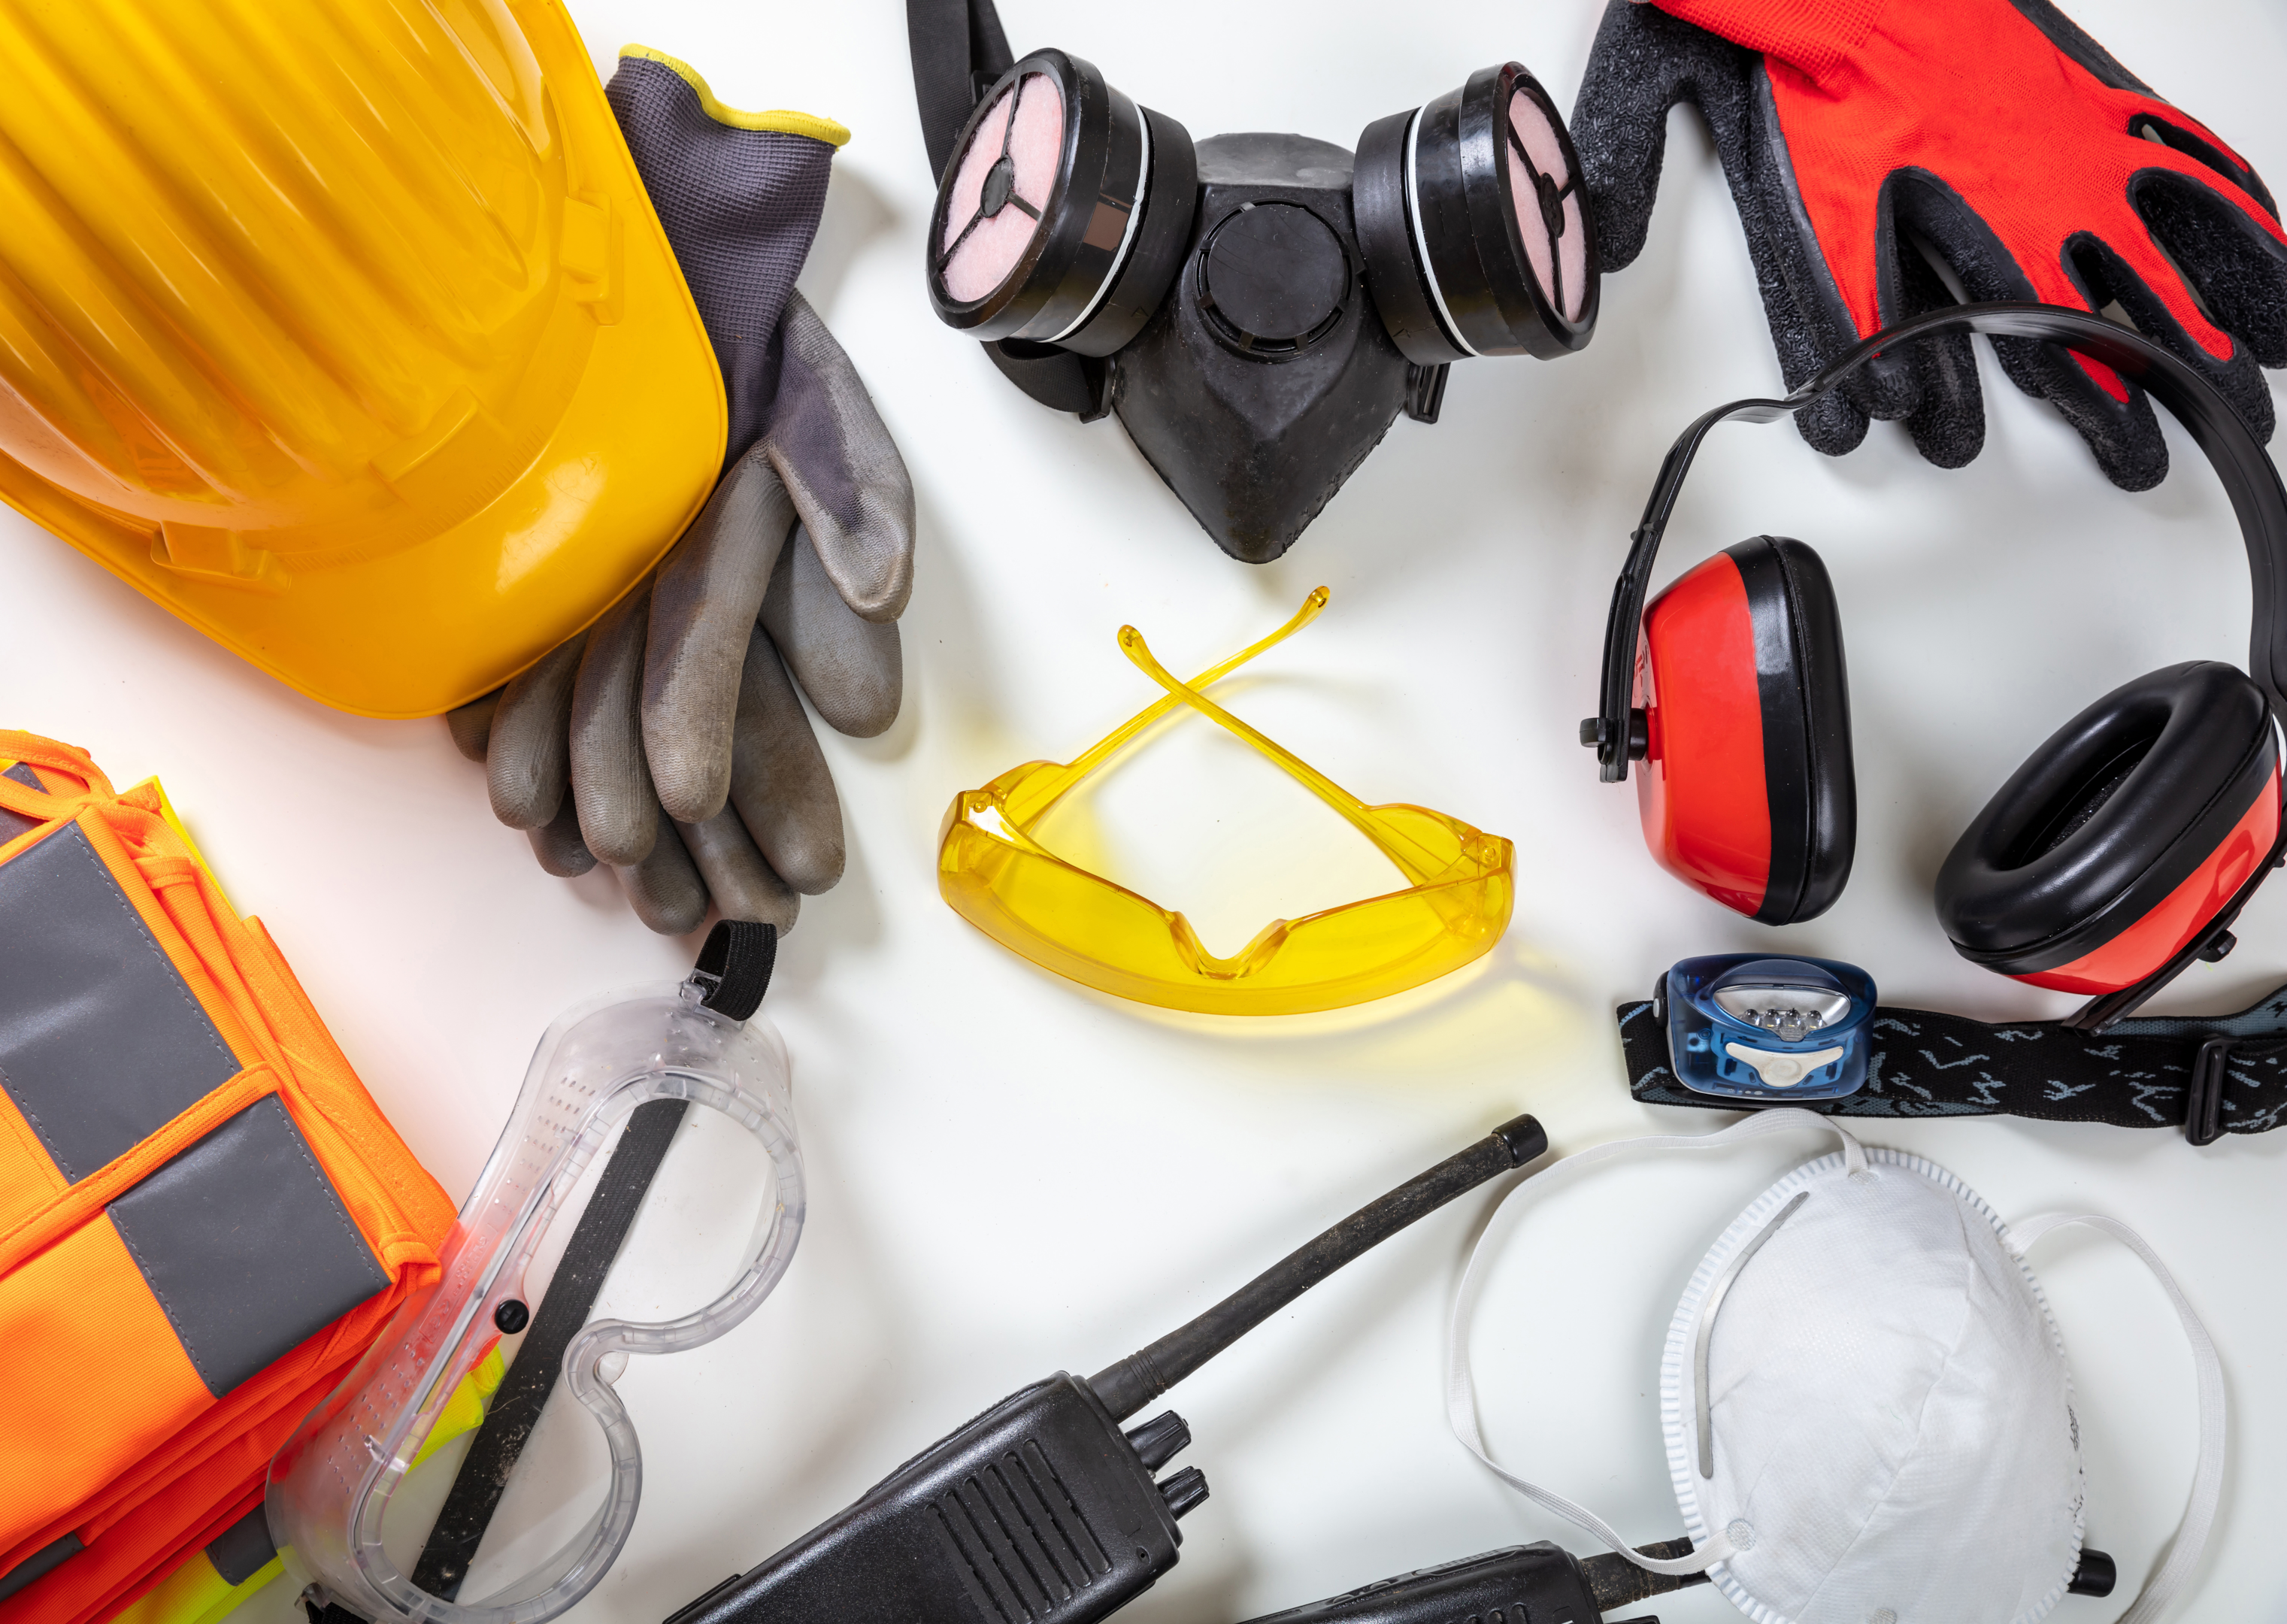 Proper personal protective equipment usage - boost productivity - organizations create a safe work environment